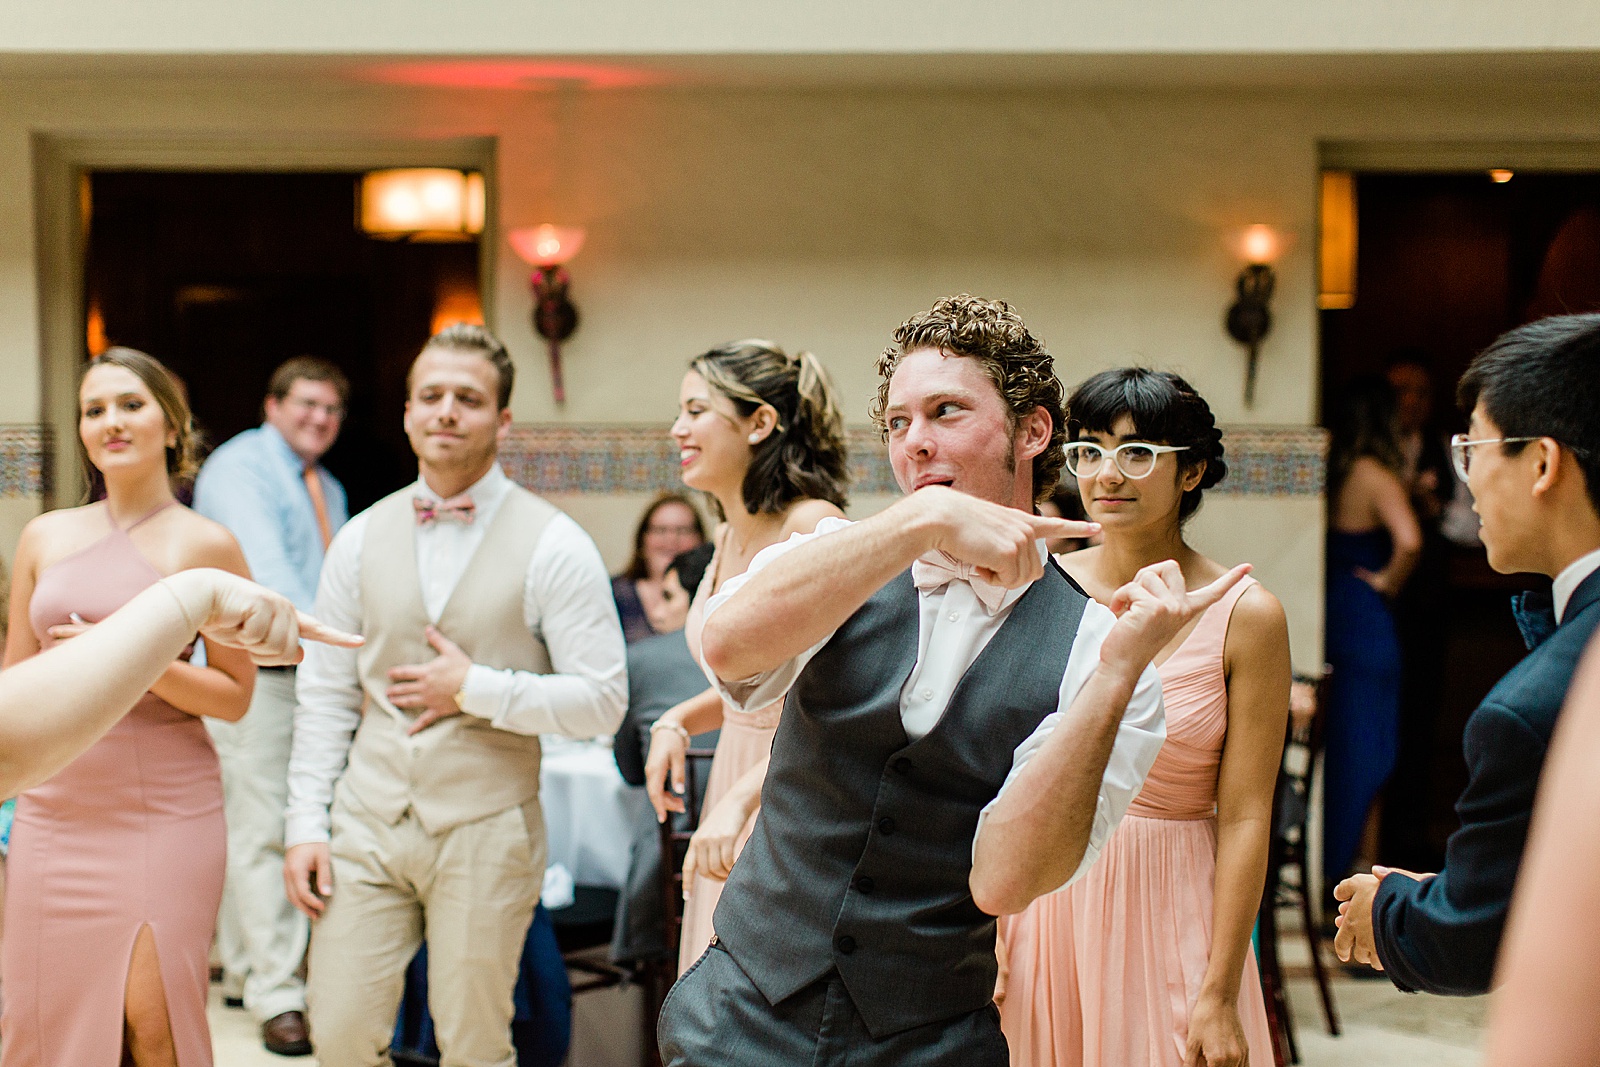 Guests Dancing at Boca Raton Wedding planned by NYC Wedding Planner Poppy + Lynn